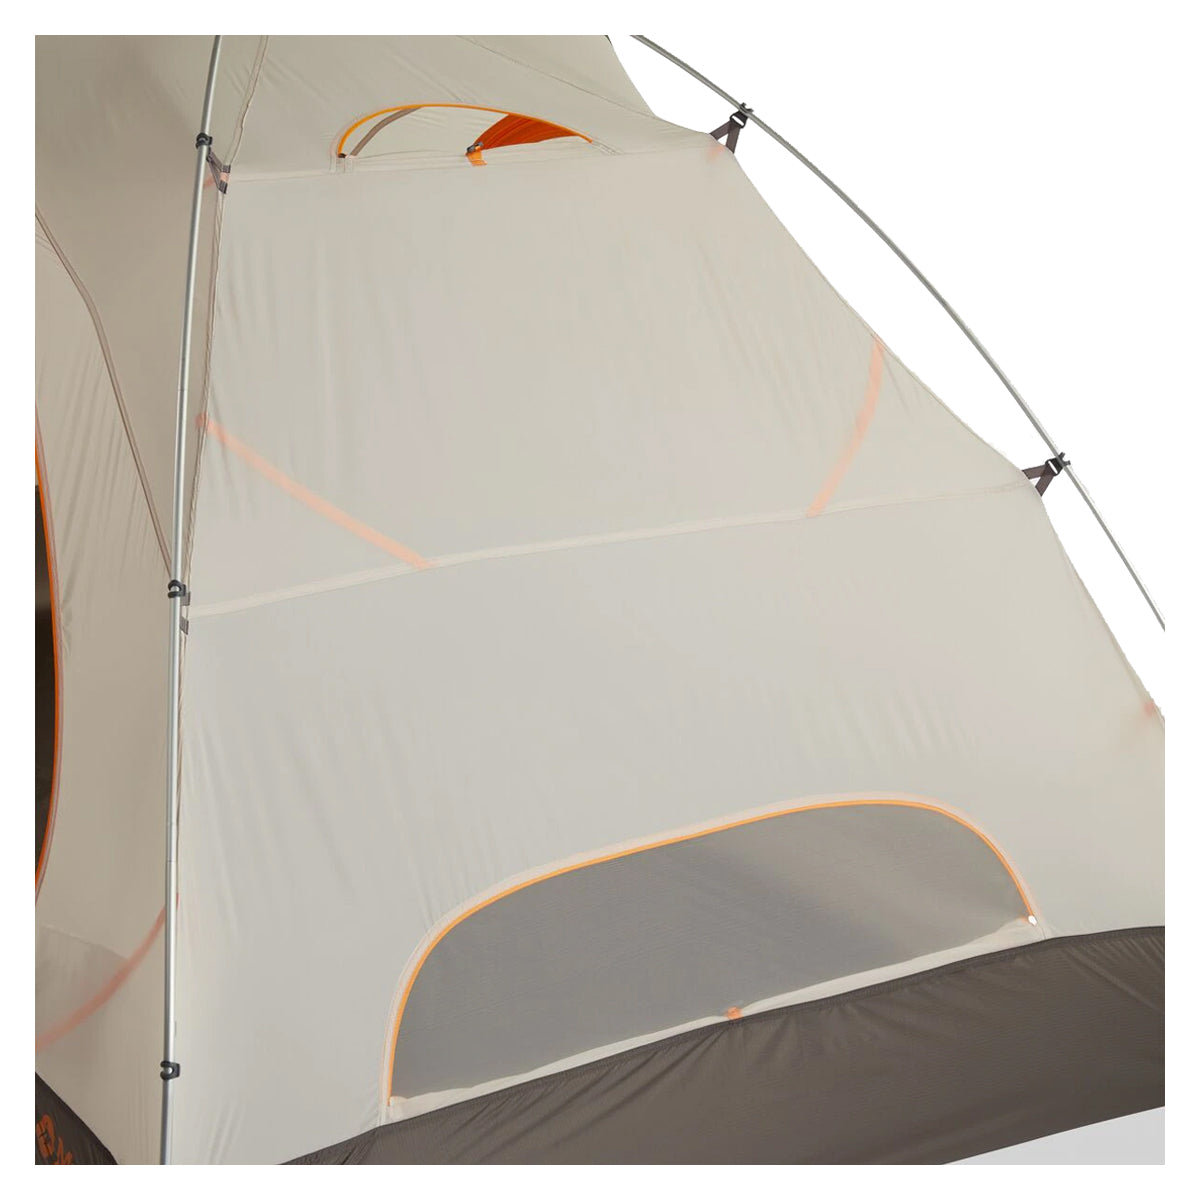 Marmot Fortress UL 3 Person Tent